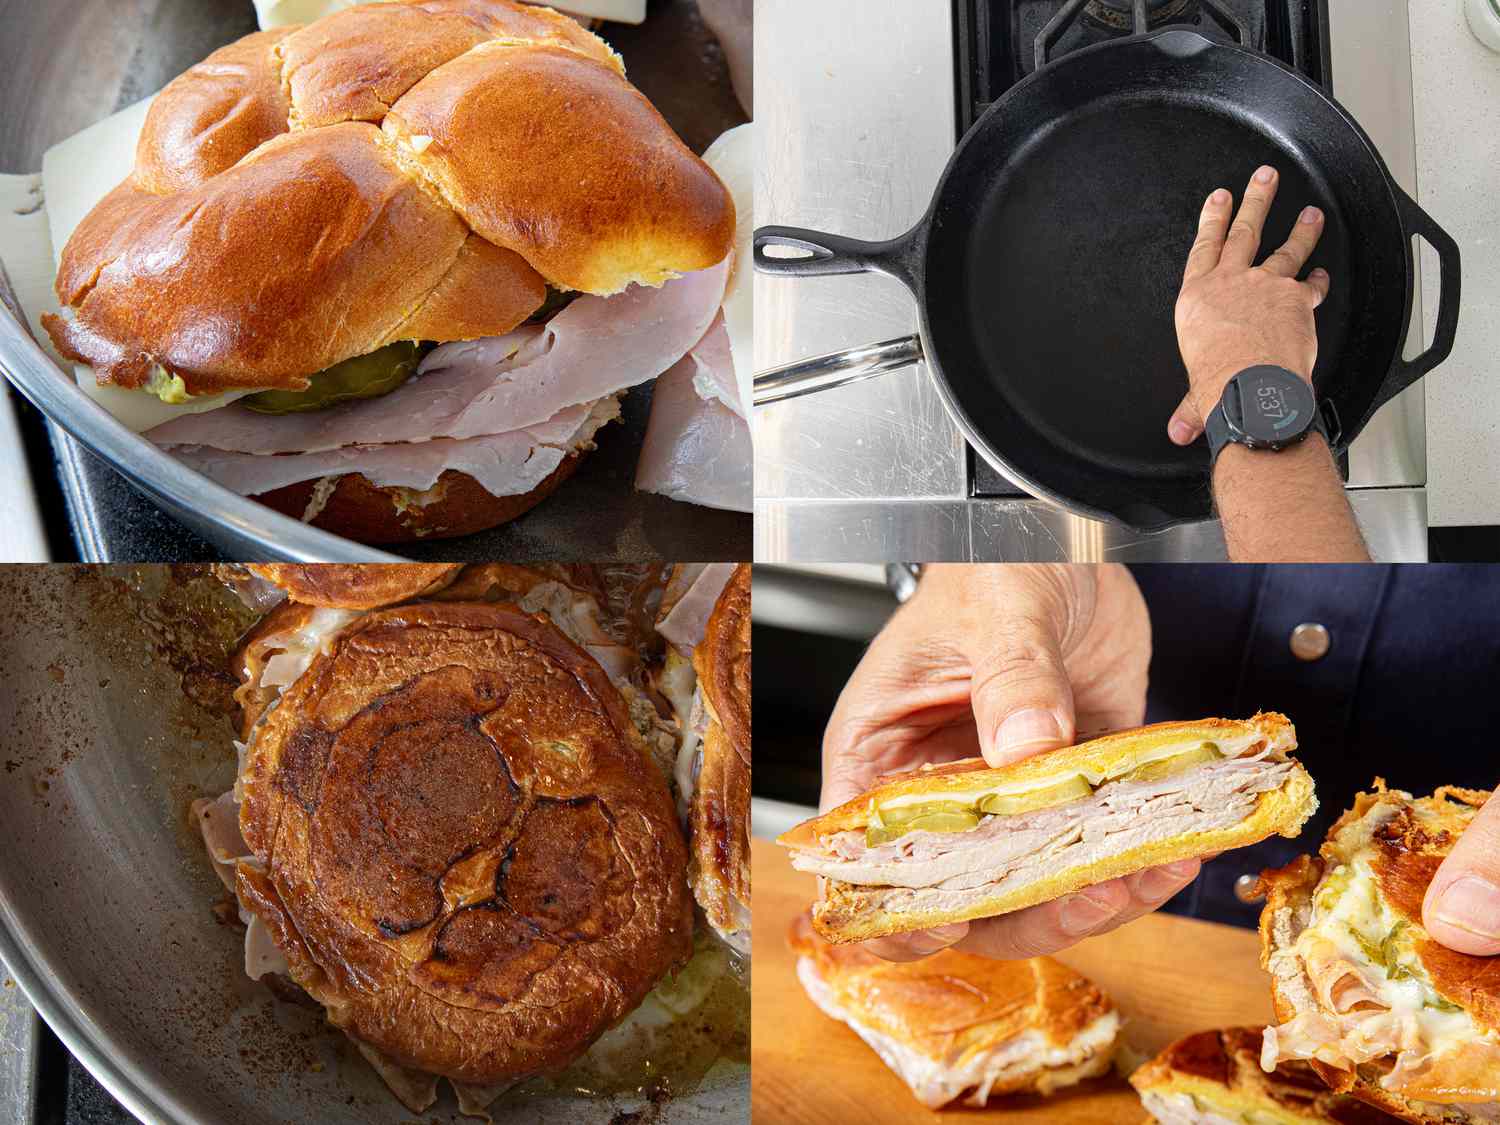 Four image collage of sandwich in skillet, pressing down with a cast iron pan, flattened sandwich in pan and cut sandwich